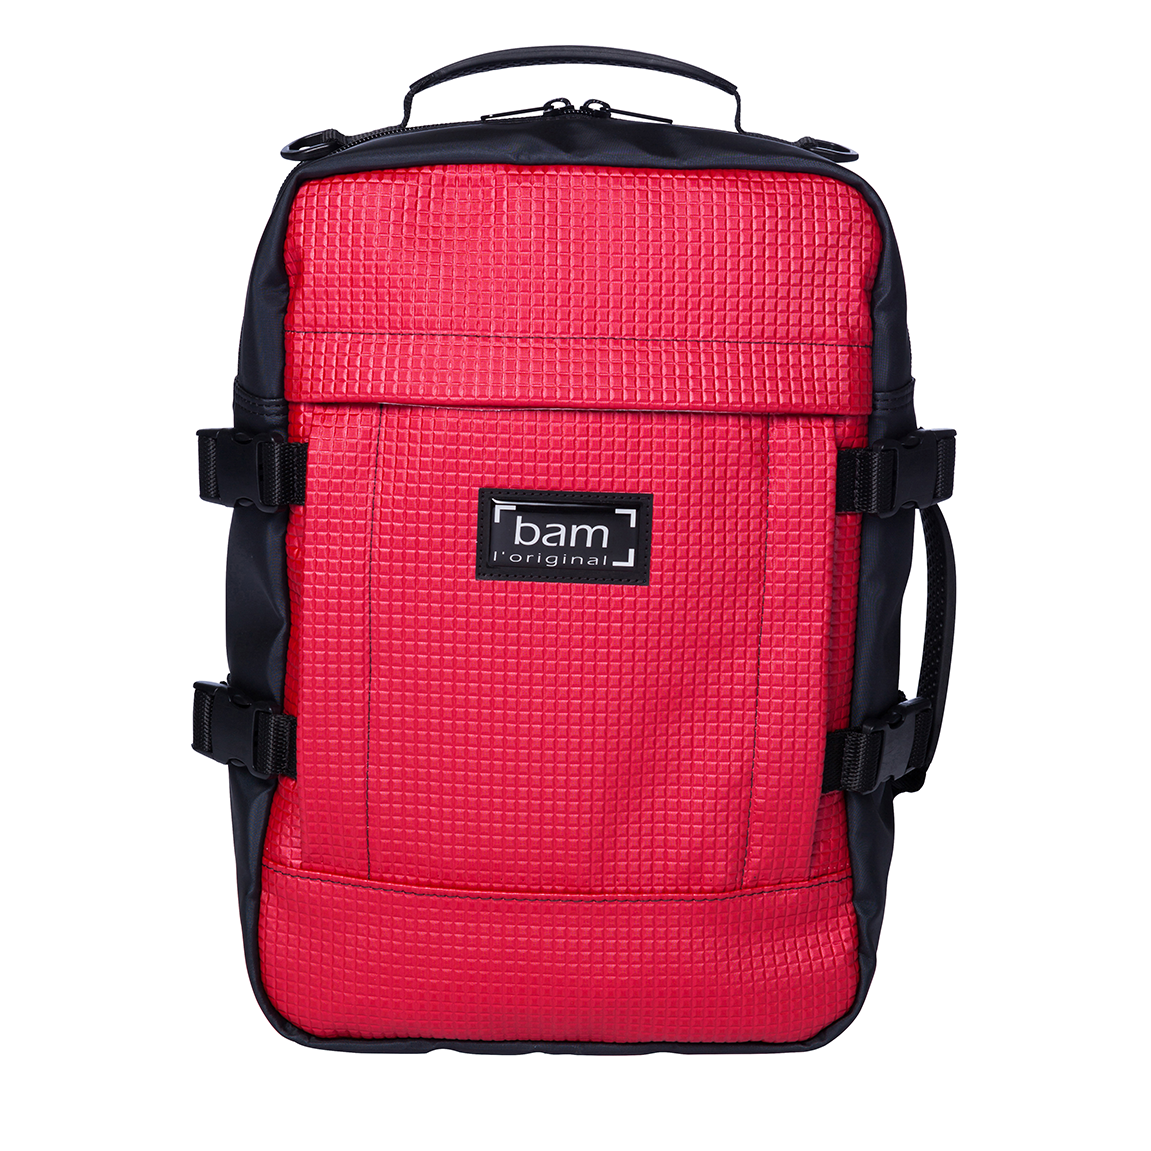 Bam - A+ Backpacks for Hightech Cases-Case-Bam-Red-Music Elements